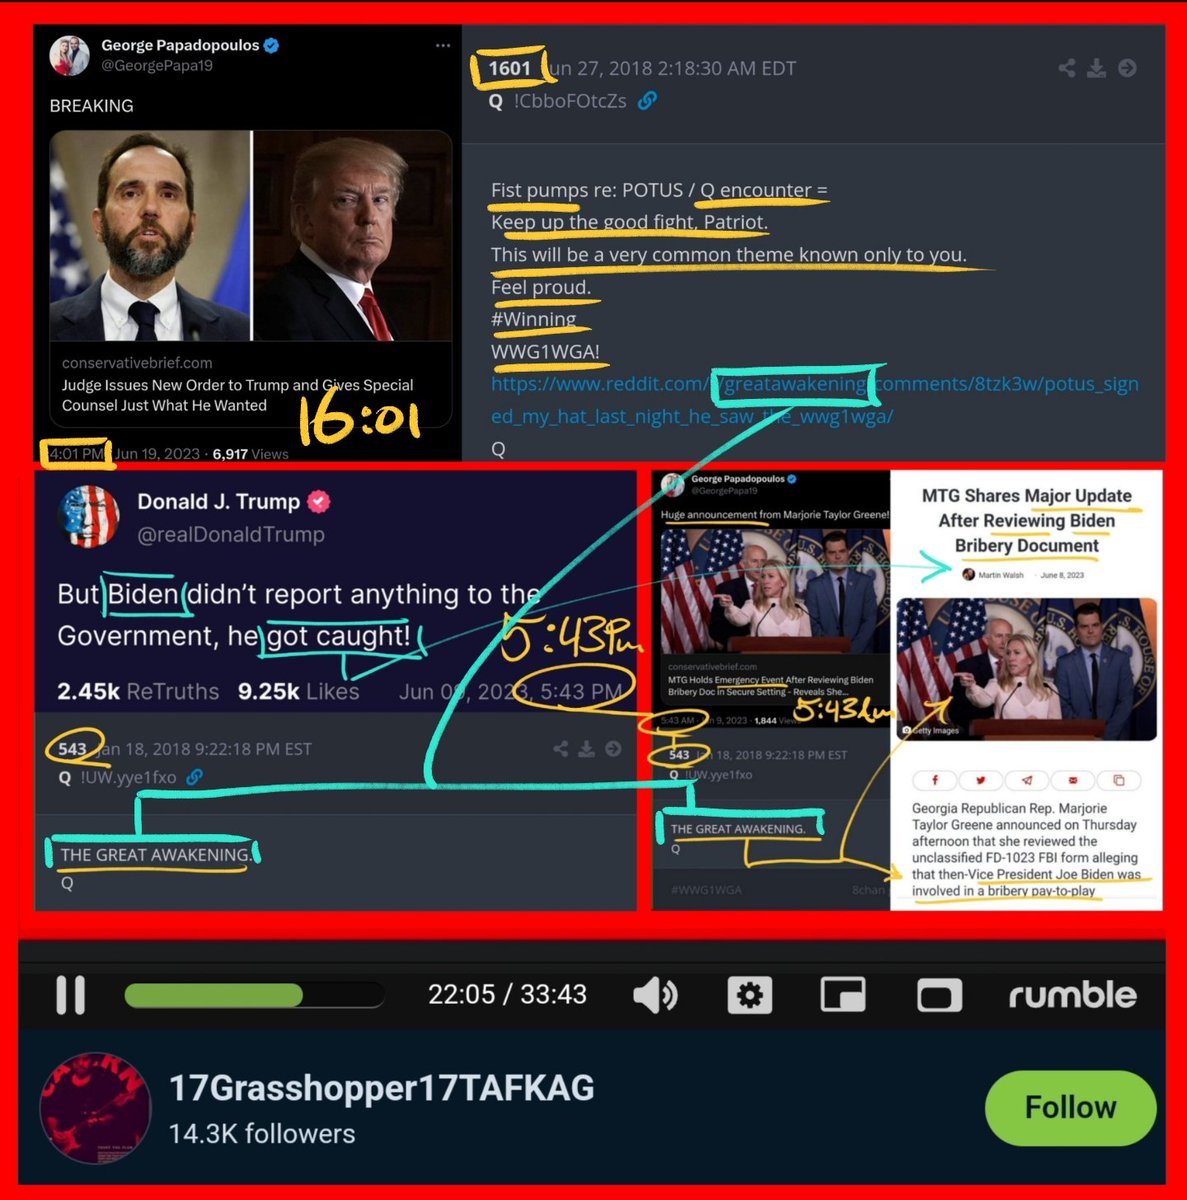 💥💥💥KABQQQQQM💥💥💥
George Papadopoulos Confirmations!

So Two Days After Our Show Where we discussed💥The Great Awakening💥Timestamps Between Trump And George

George Drops An Breaking Article at 16:01

##1601
💥GREAT AWAKENING💥REDDIT LINK
Fist pumps re: POTUS /👉Q encounter…